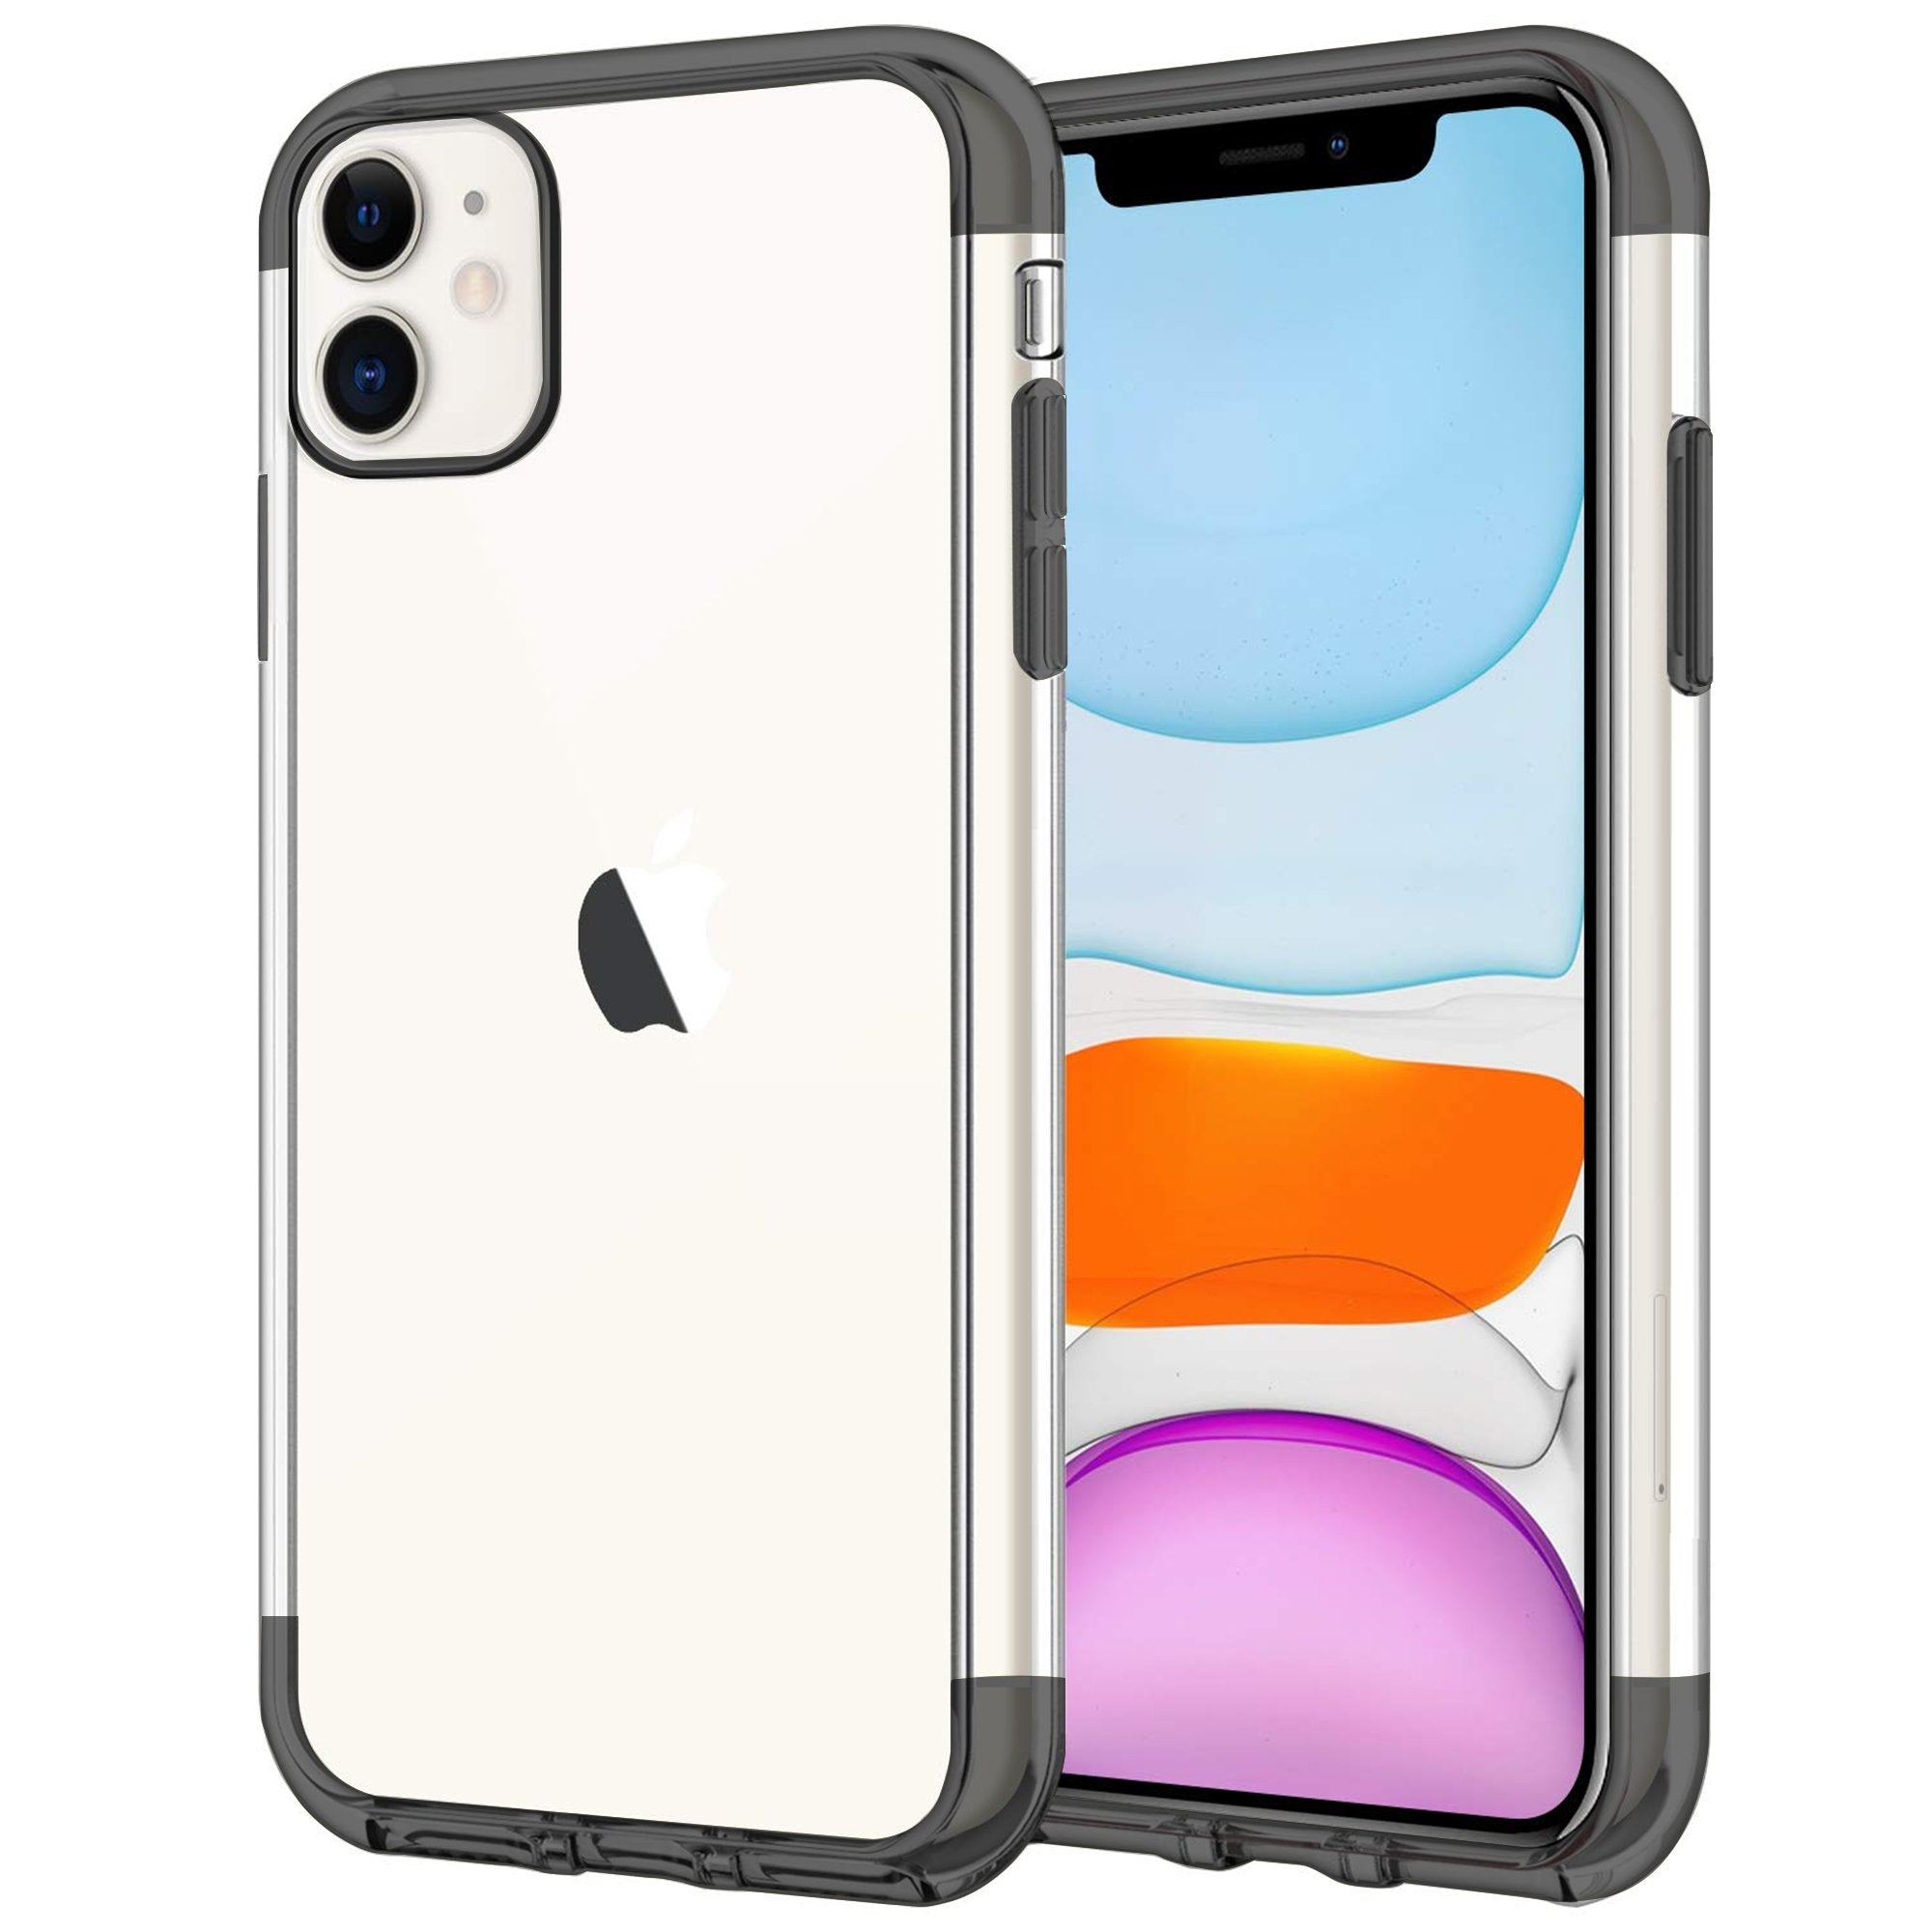 Case for iPhone 11 Shock Proof Soft TPU Silicone Phone Clear Slim Cover